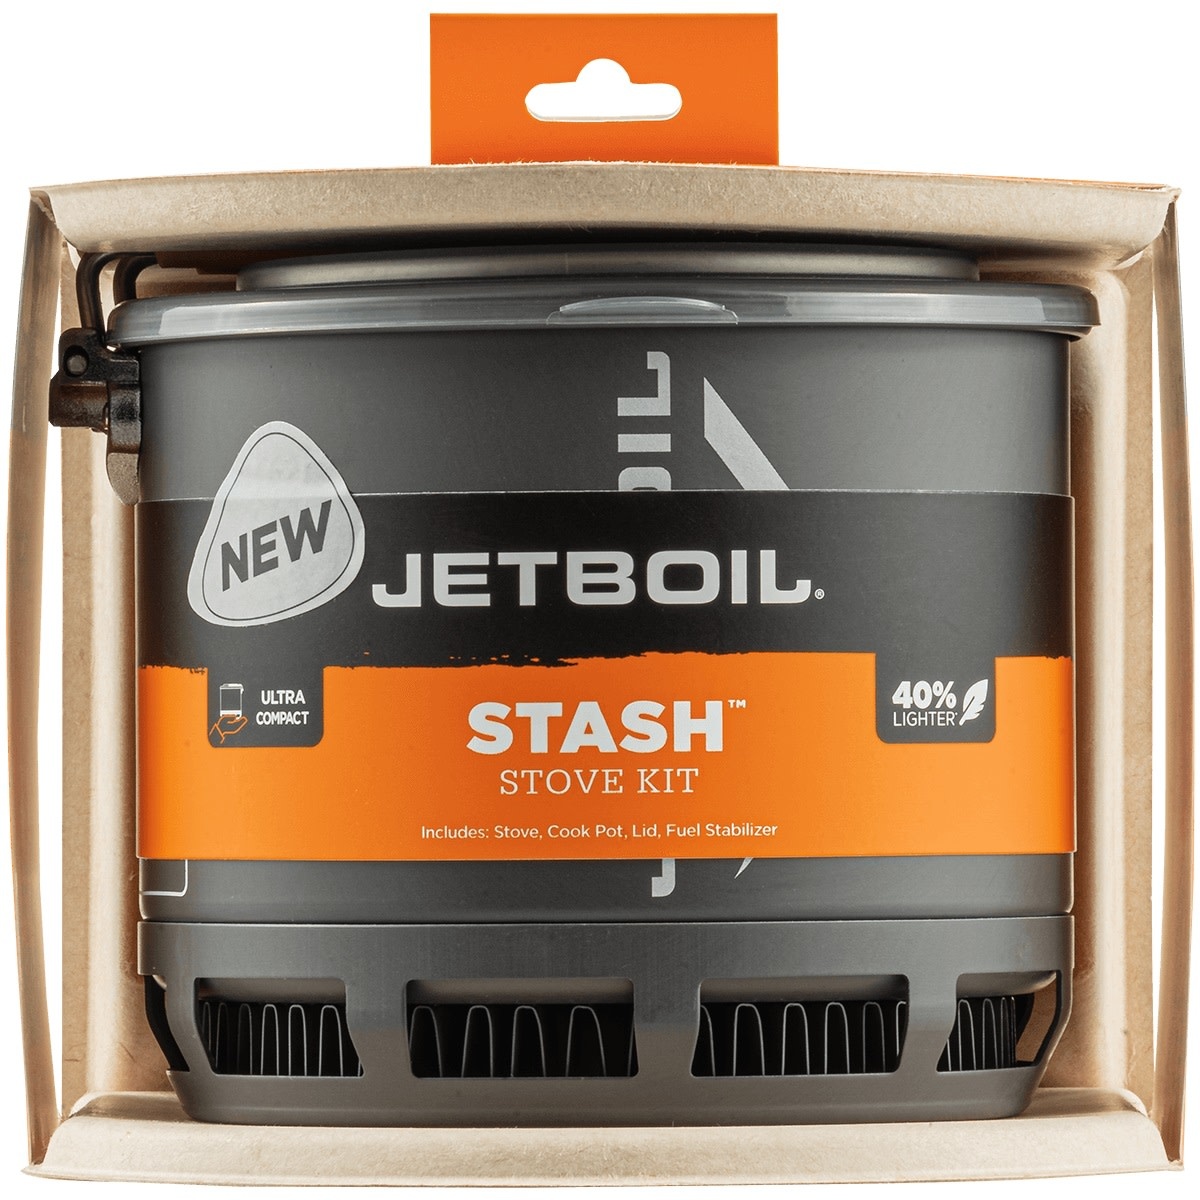 Jetboil Stash PCS | The BackCountry in Truckee, CA - The BackCountry